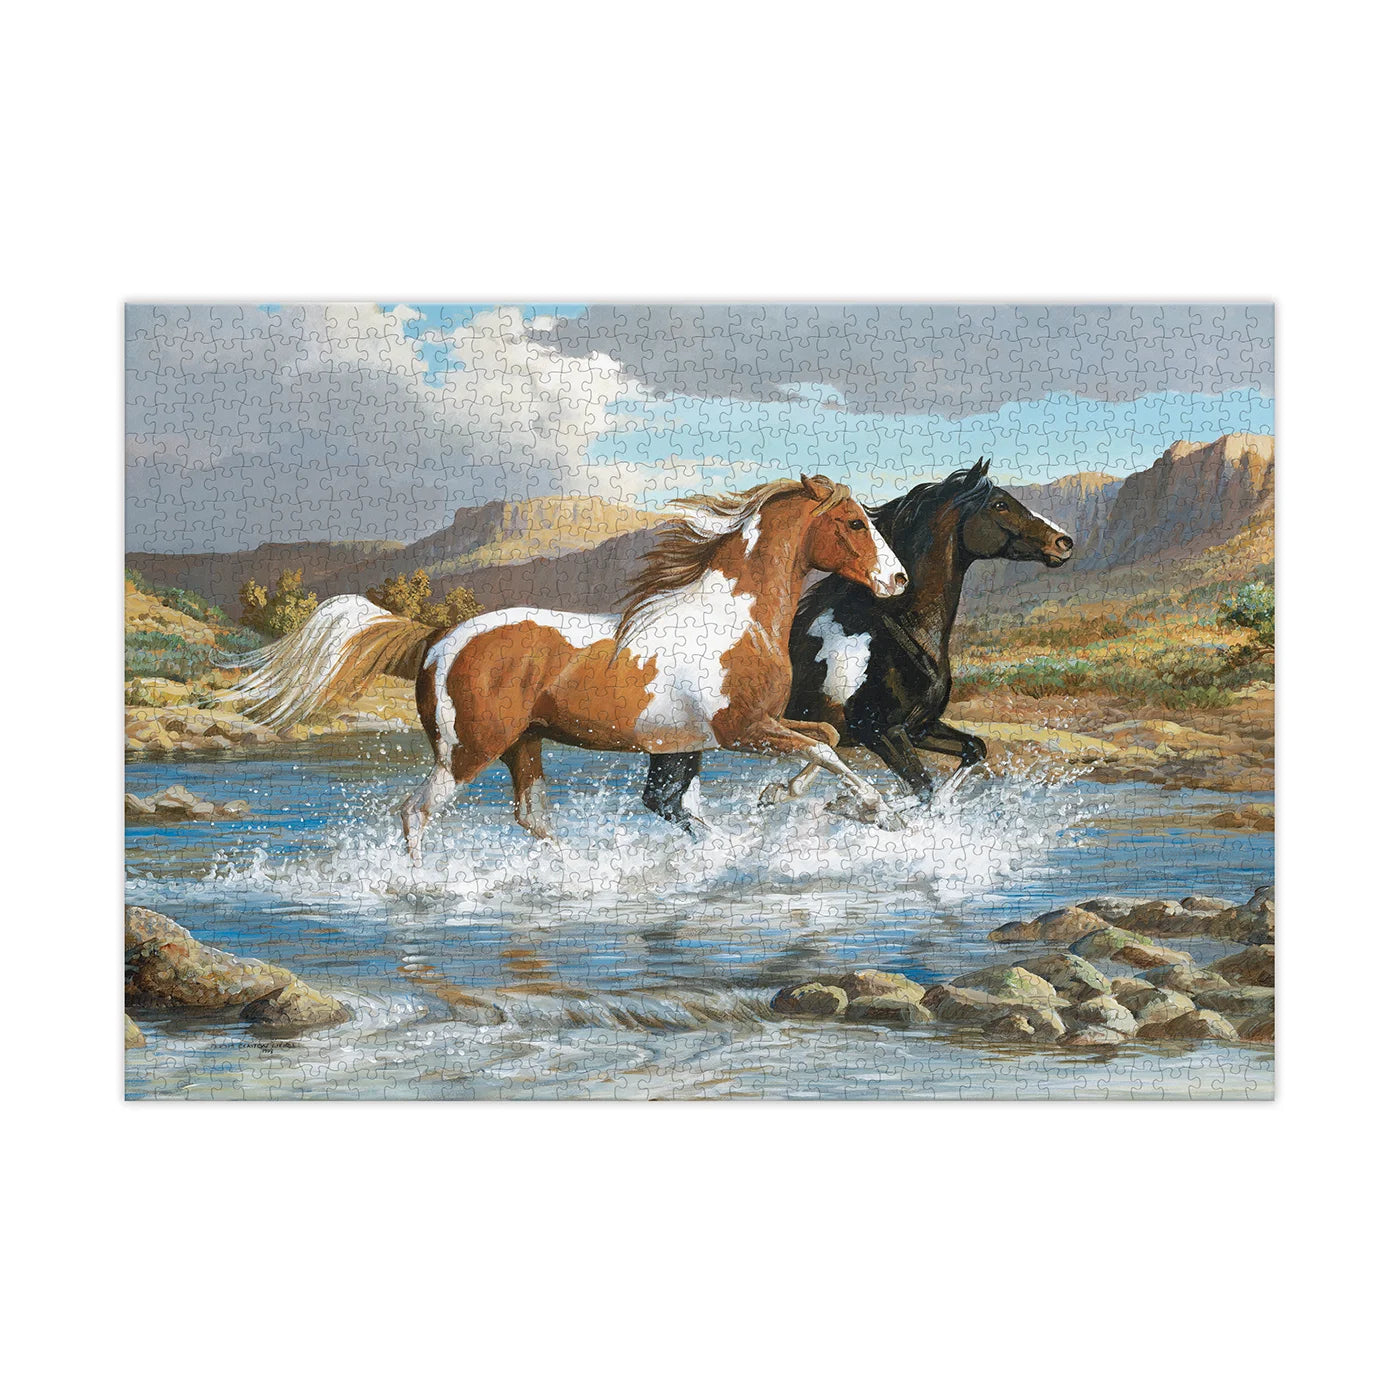 LANG Stream Canter - 1000pc Jigsaw Puzzle